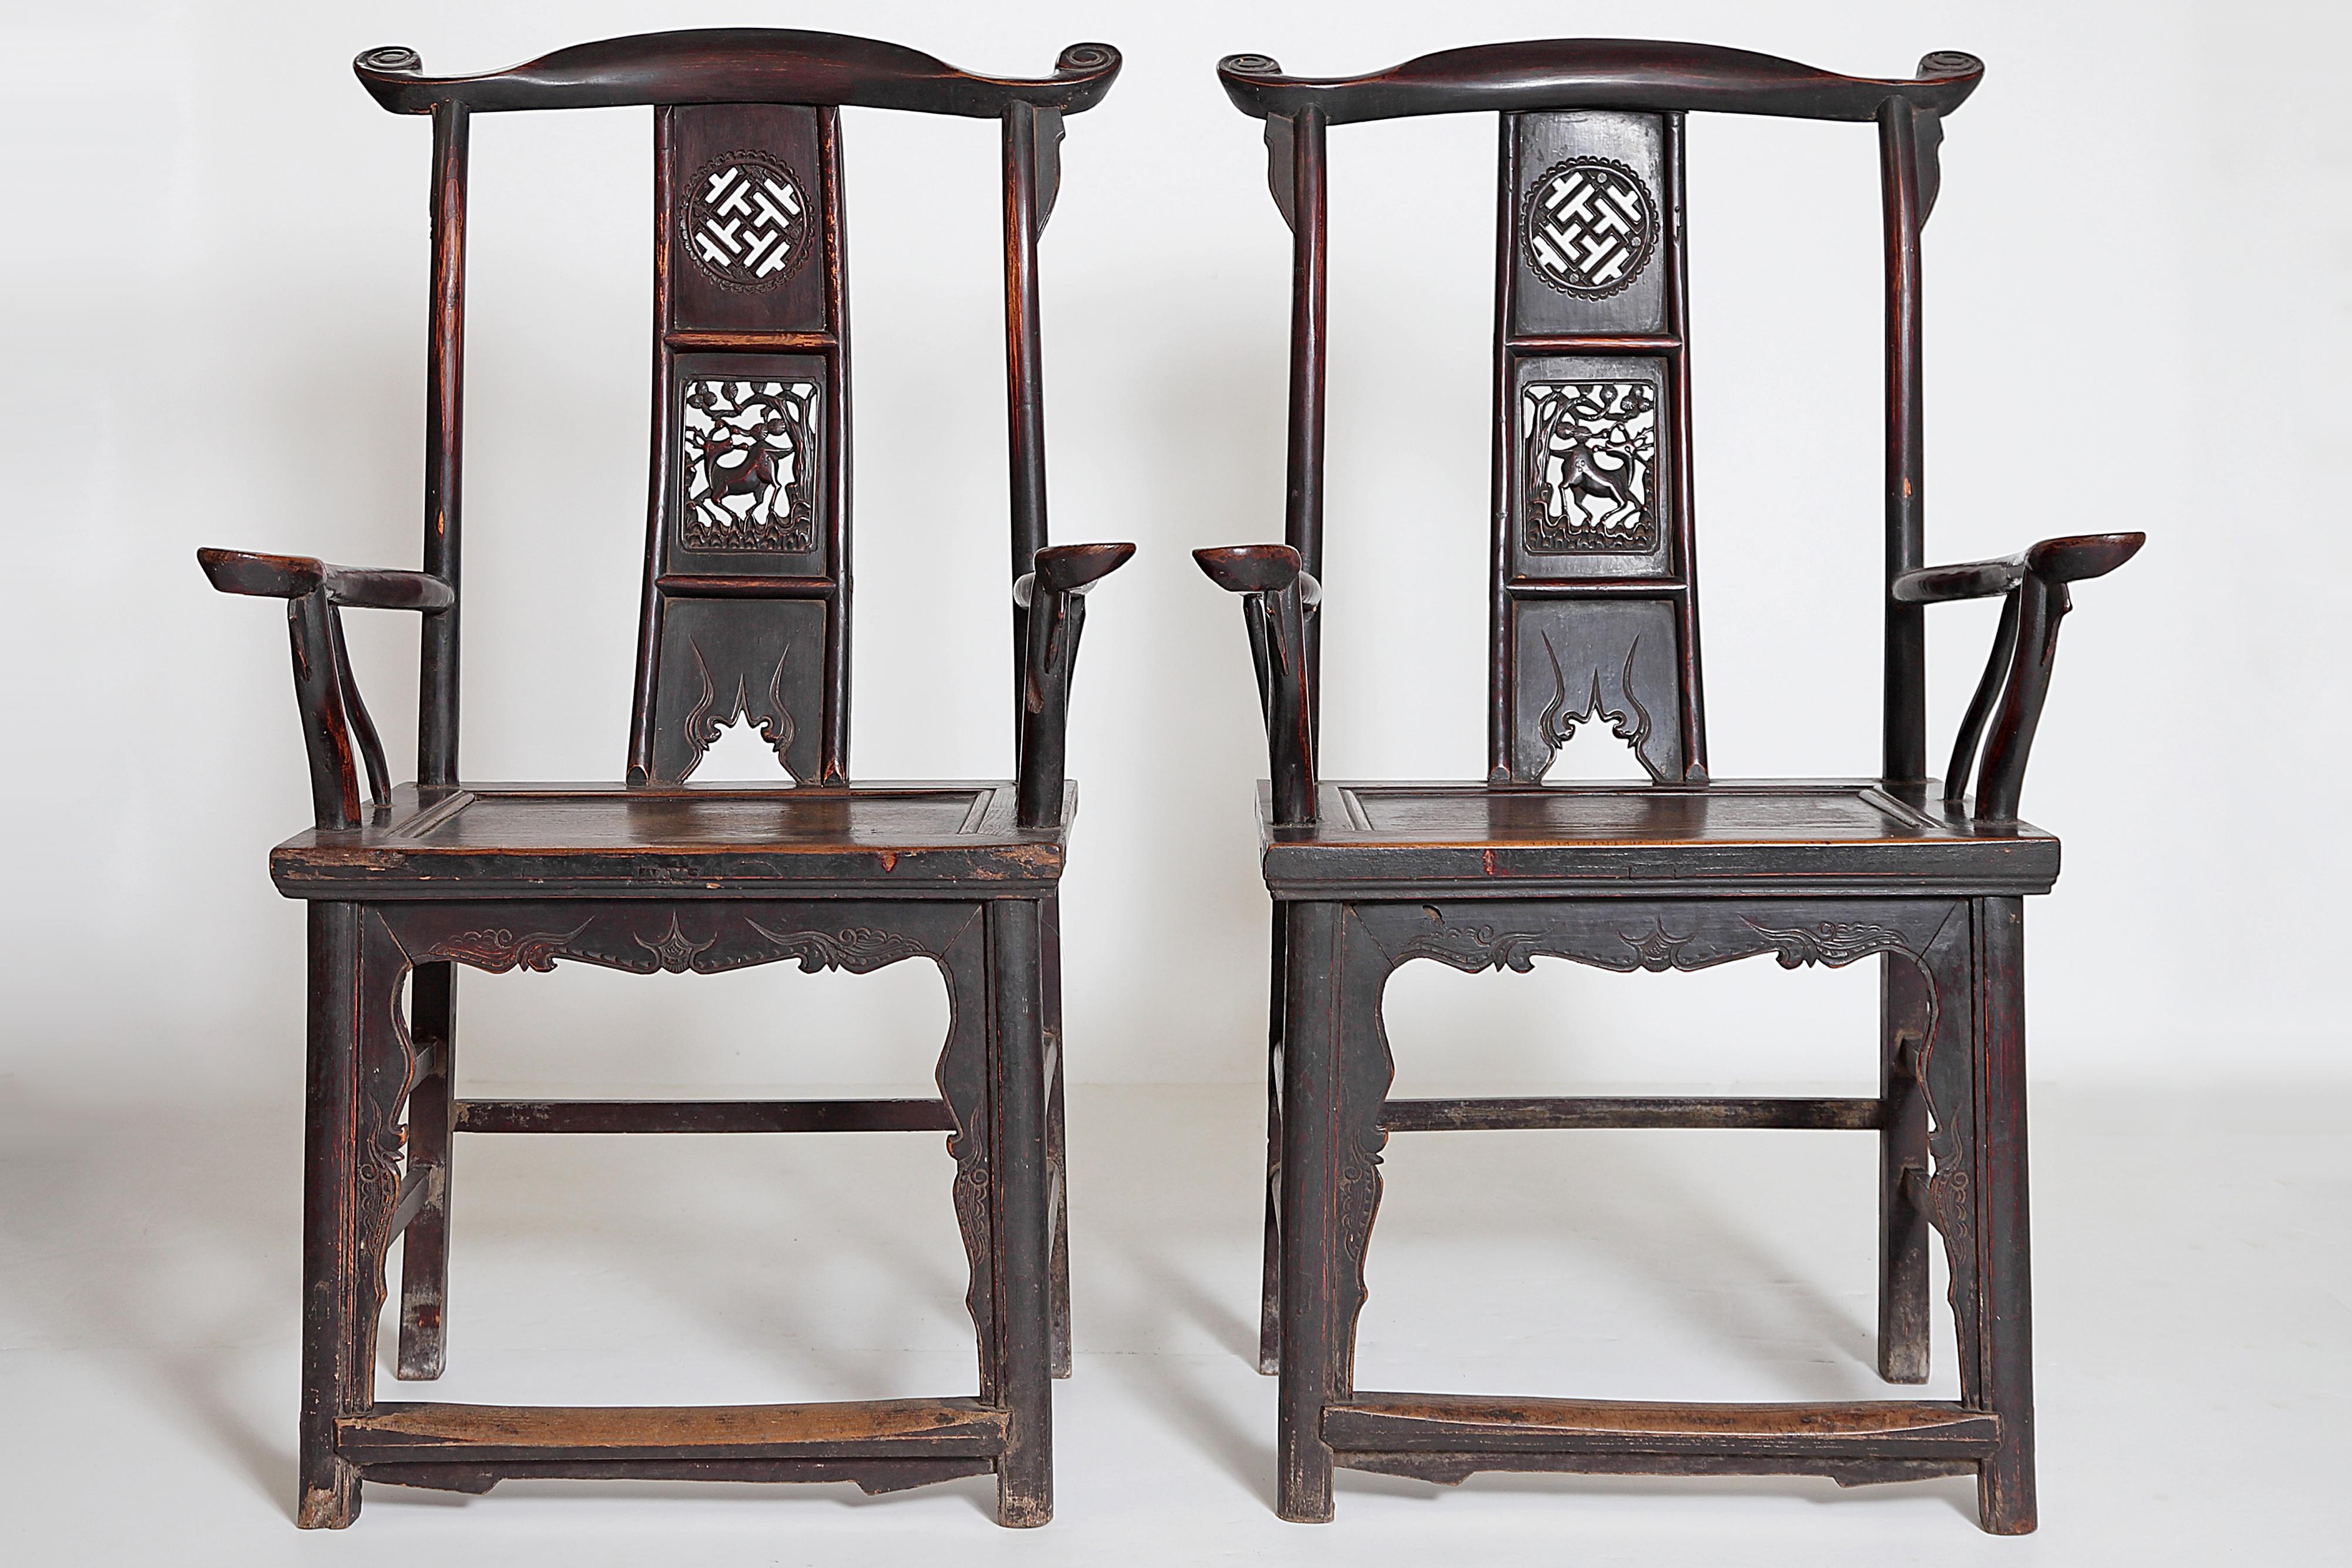 A pair of antique Chinese scholar's chairs, oak with nice patina, curved back a splat with open fretwork decorations, including a deer and various symbols, solid seats, nicely shaped arms, straight legs with stretchers, 19th century, China.